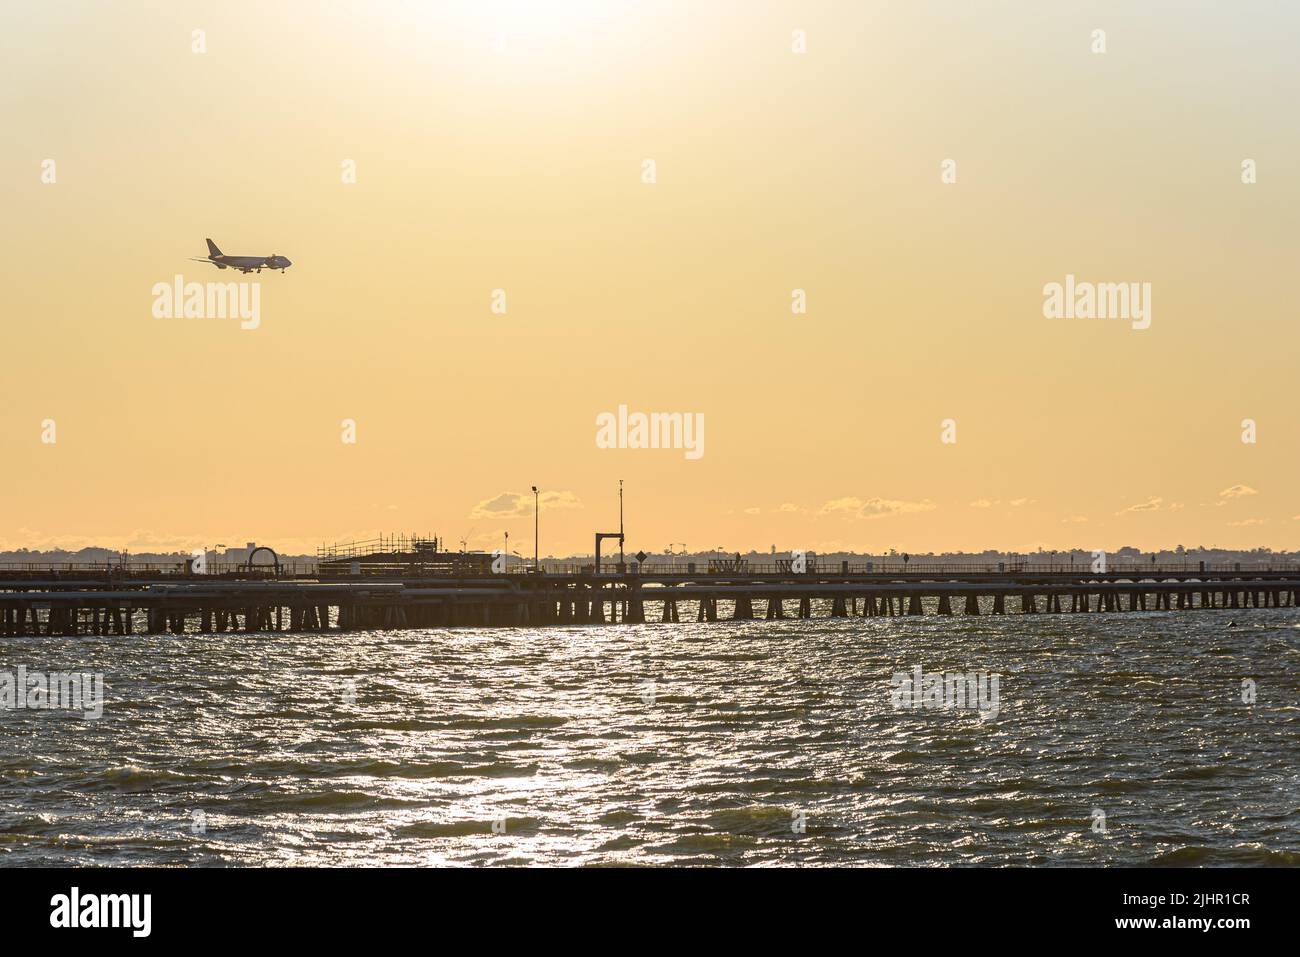 A UPS 747 plane on its approach to Sydney Airport above Botany Bay at sunset Stock Photo